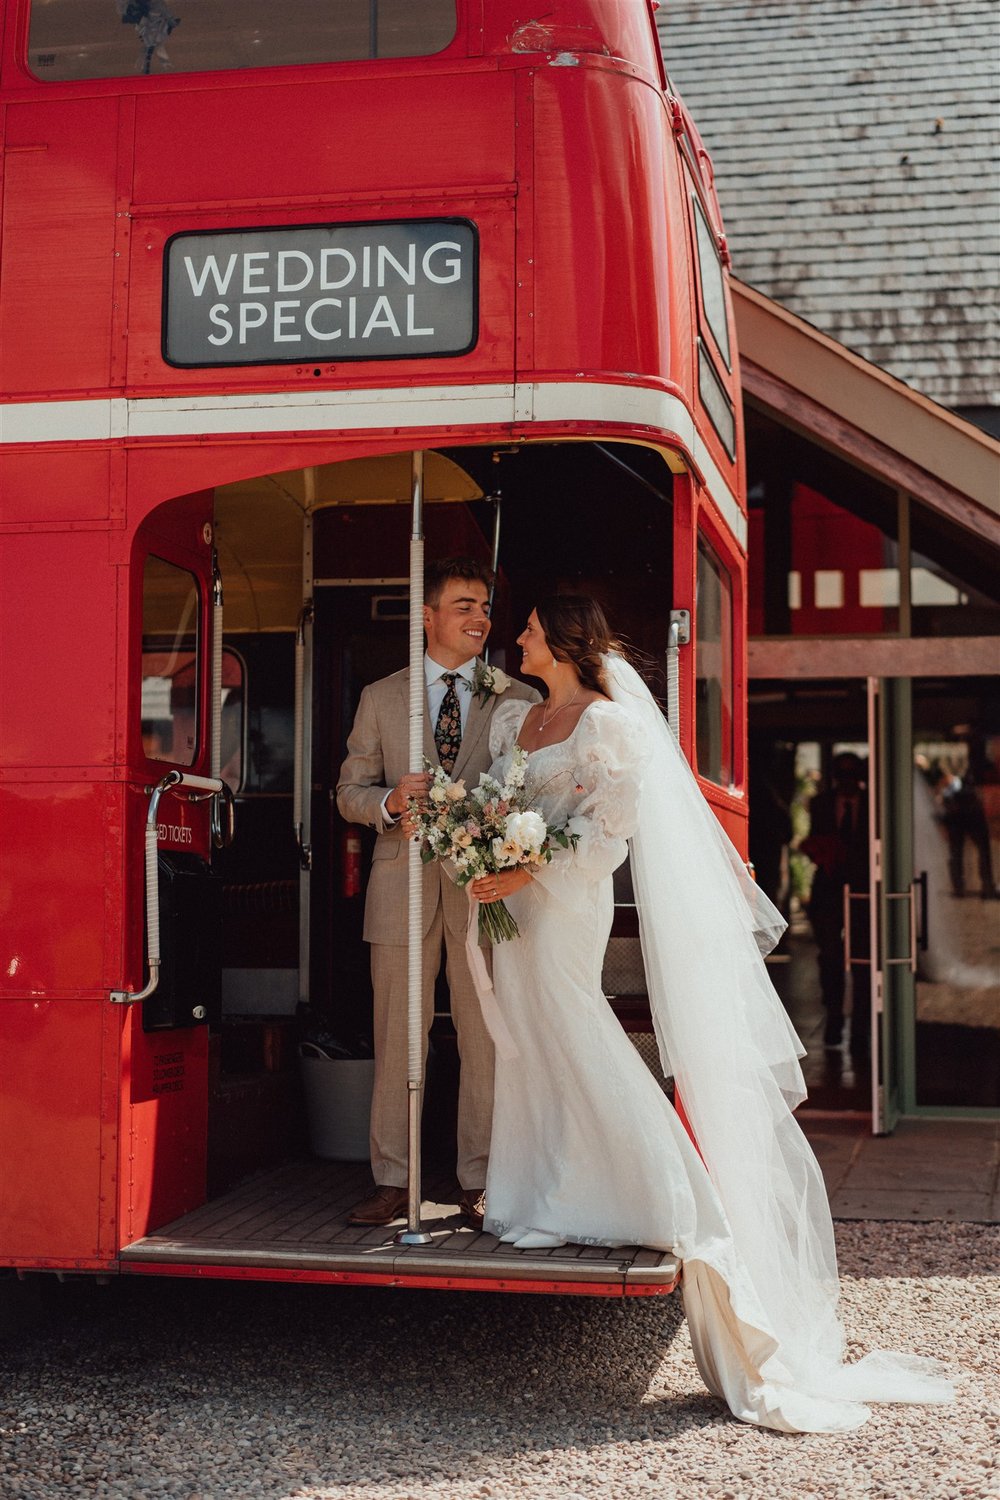 Quintessental English country garden wedding with red london bus to transport guests